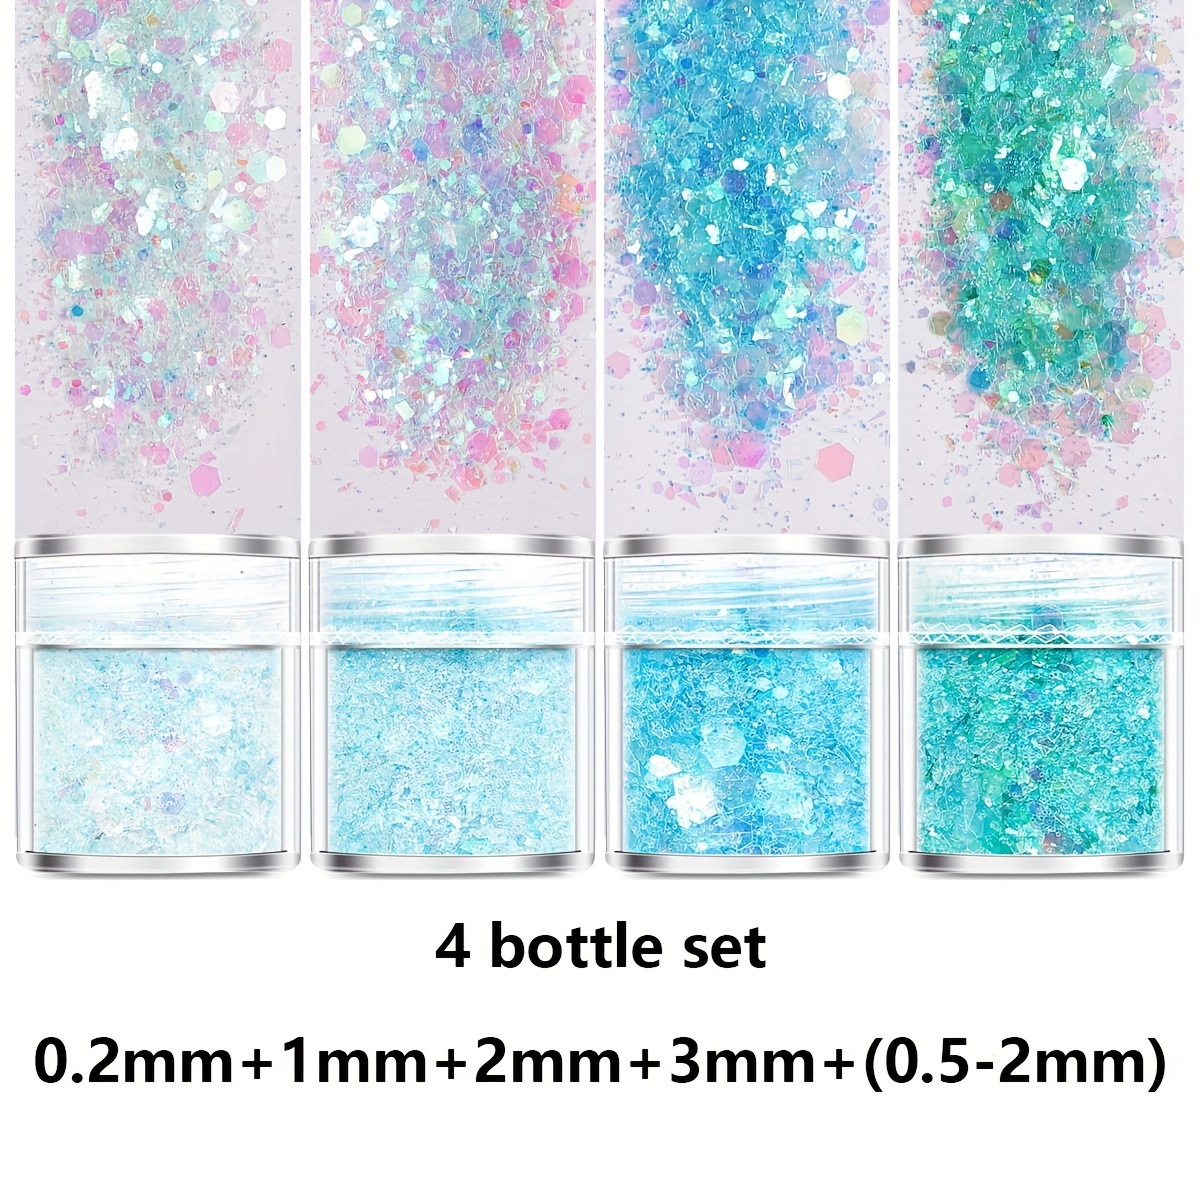 Chunky Glitter for Resins Crafts,3mm Red Stars Shapes Holographic Flakes  Sequins for Slime, Nail Art,Tumblers, Resin Craft, Festival Party - 0.35oz